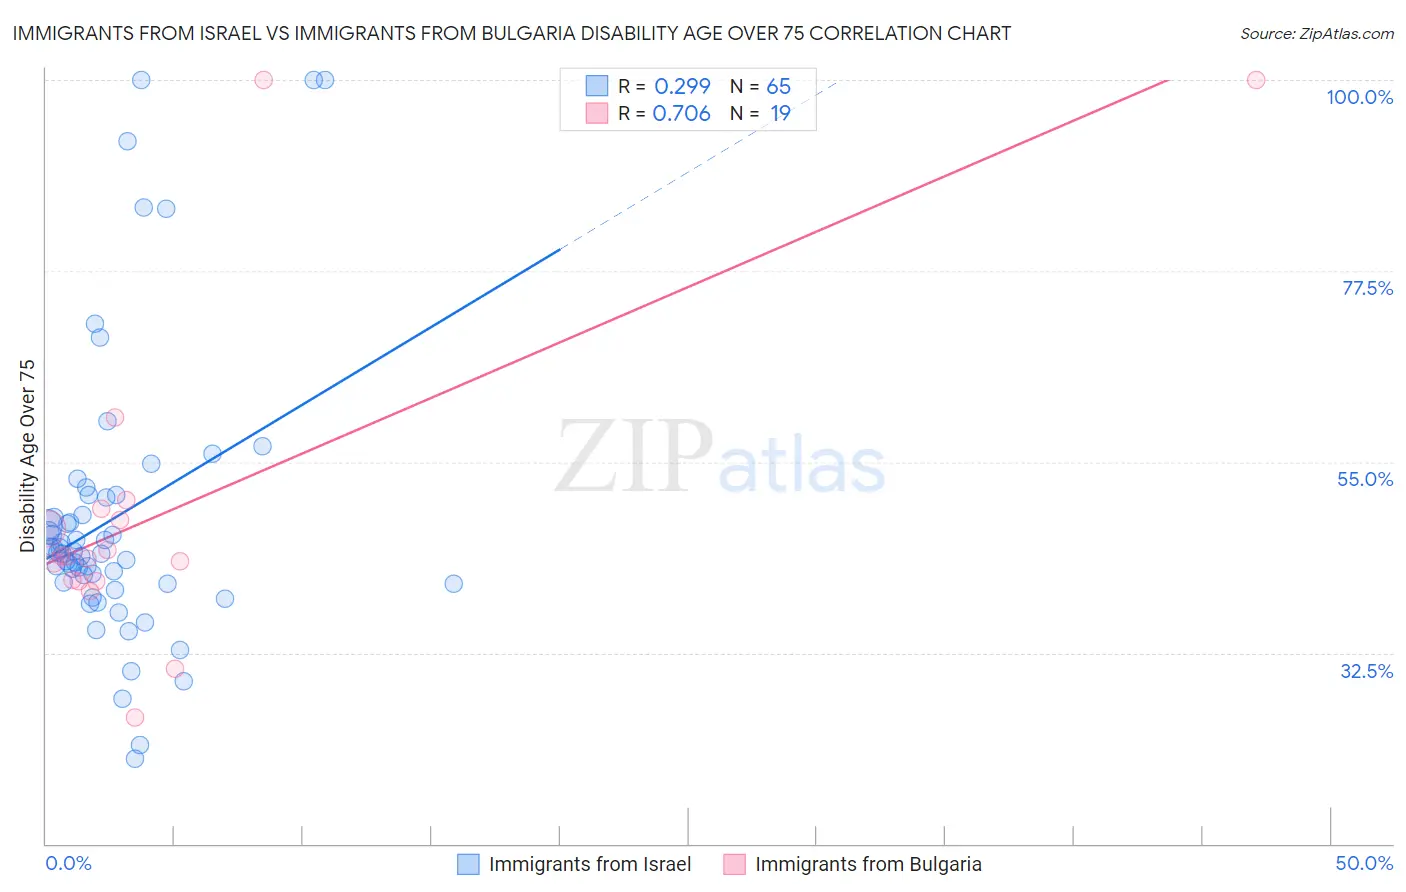 Immigrants from Israel vs Immigrants from Bulgaria Disability Age Over 75